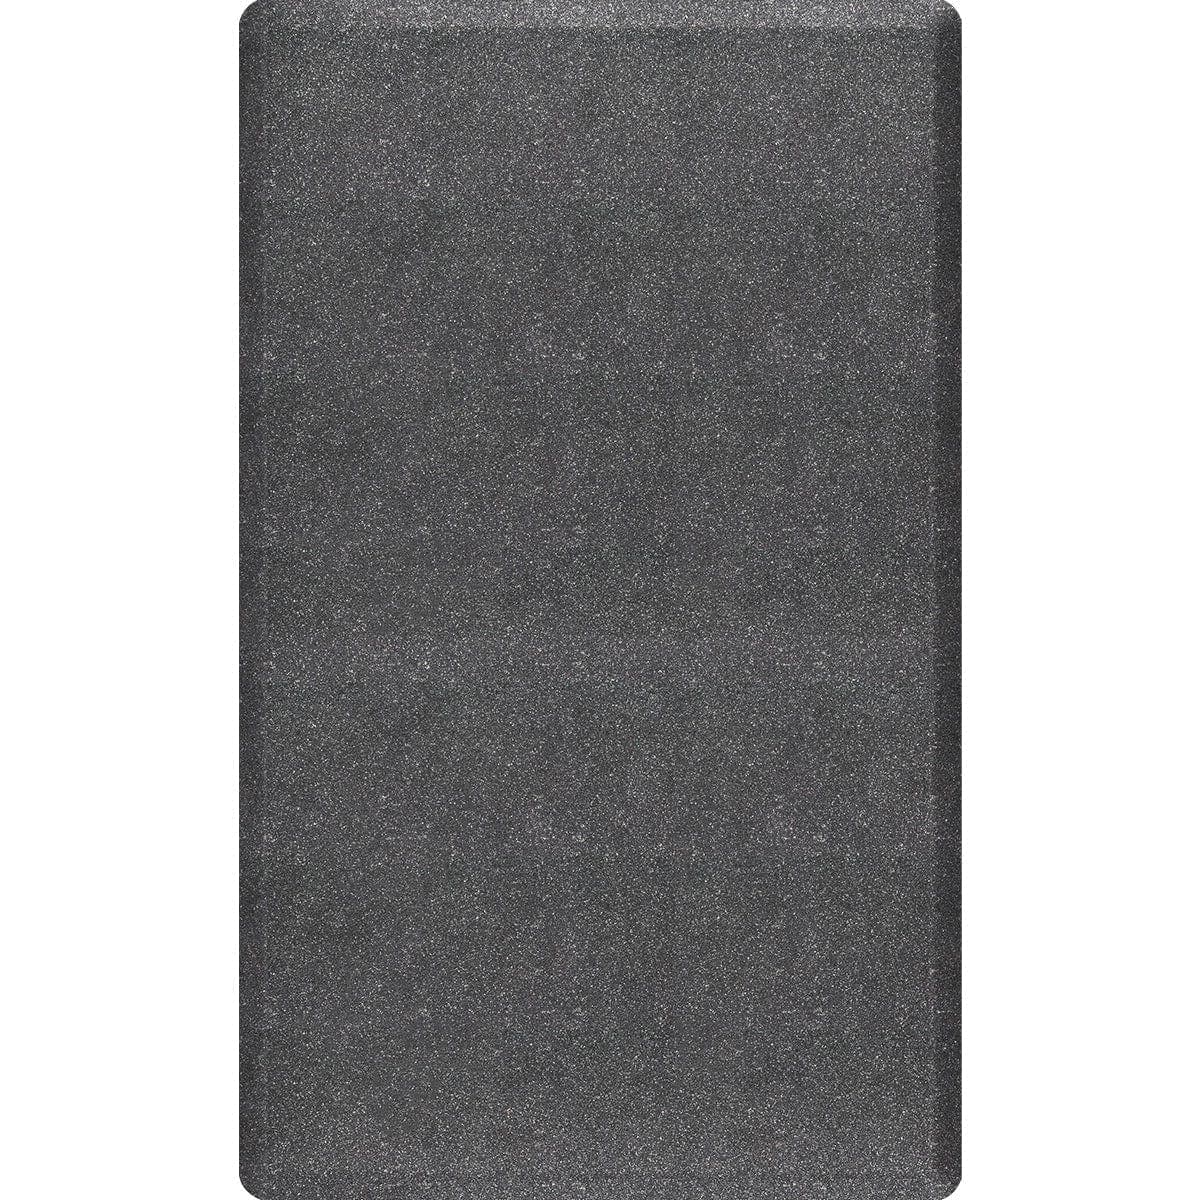 WellnessMats All WellnessMats WellnessMats FitnessMat Collection - Granite Steel